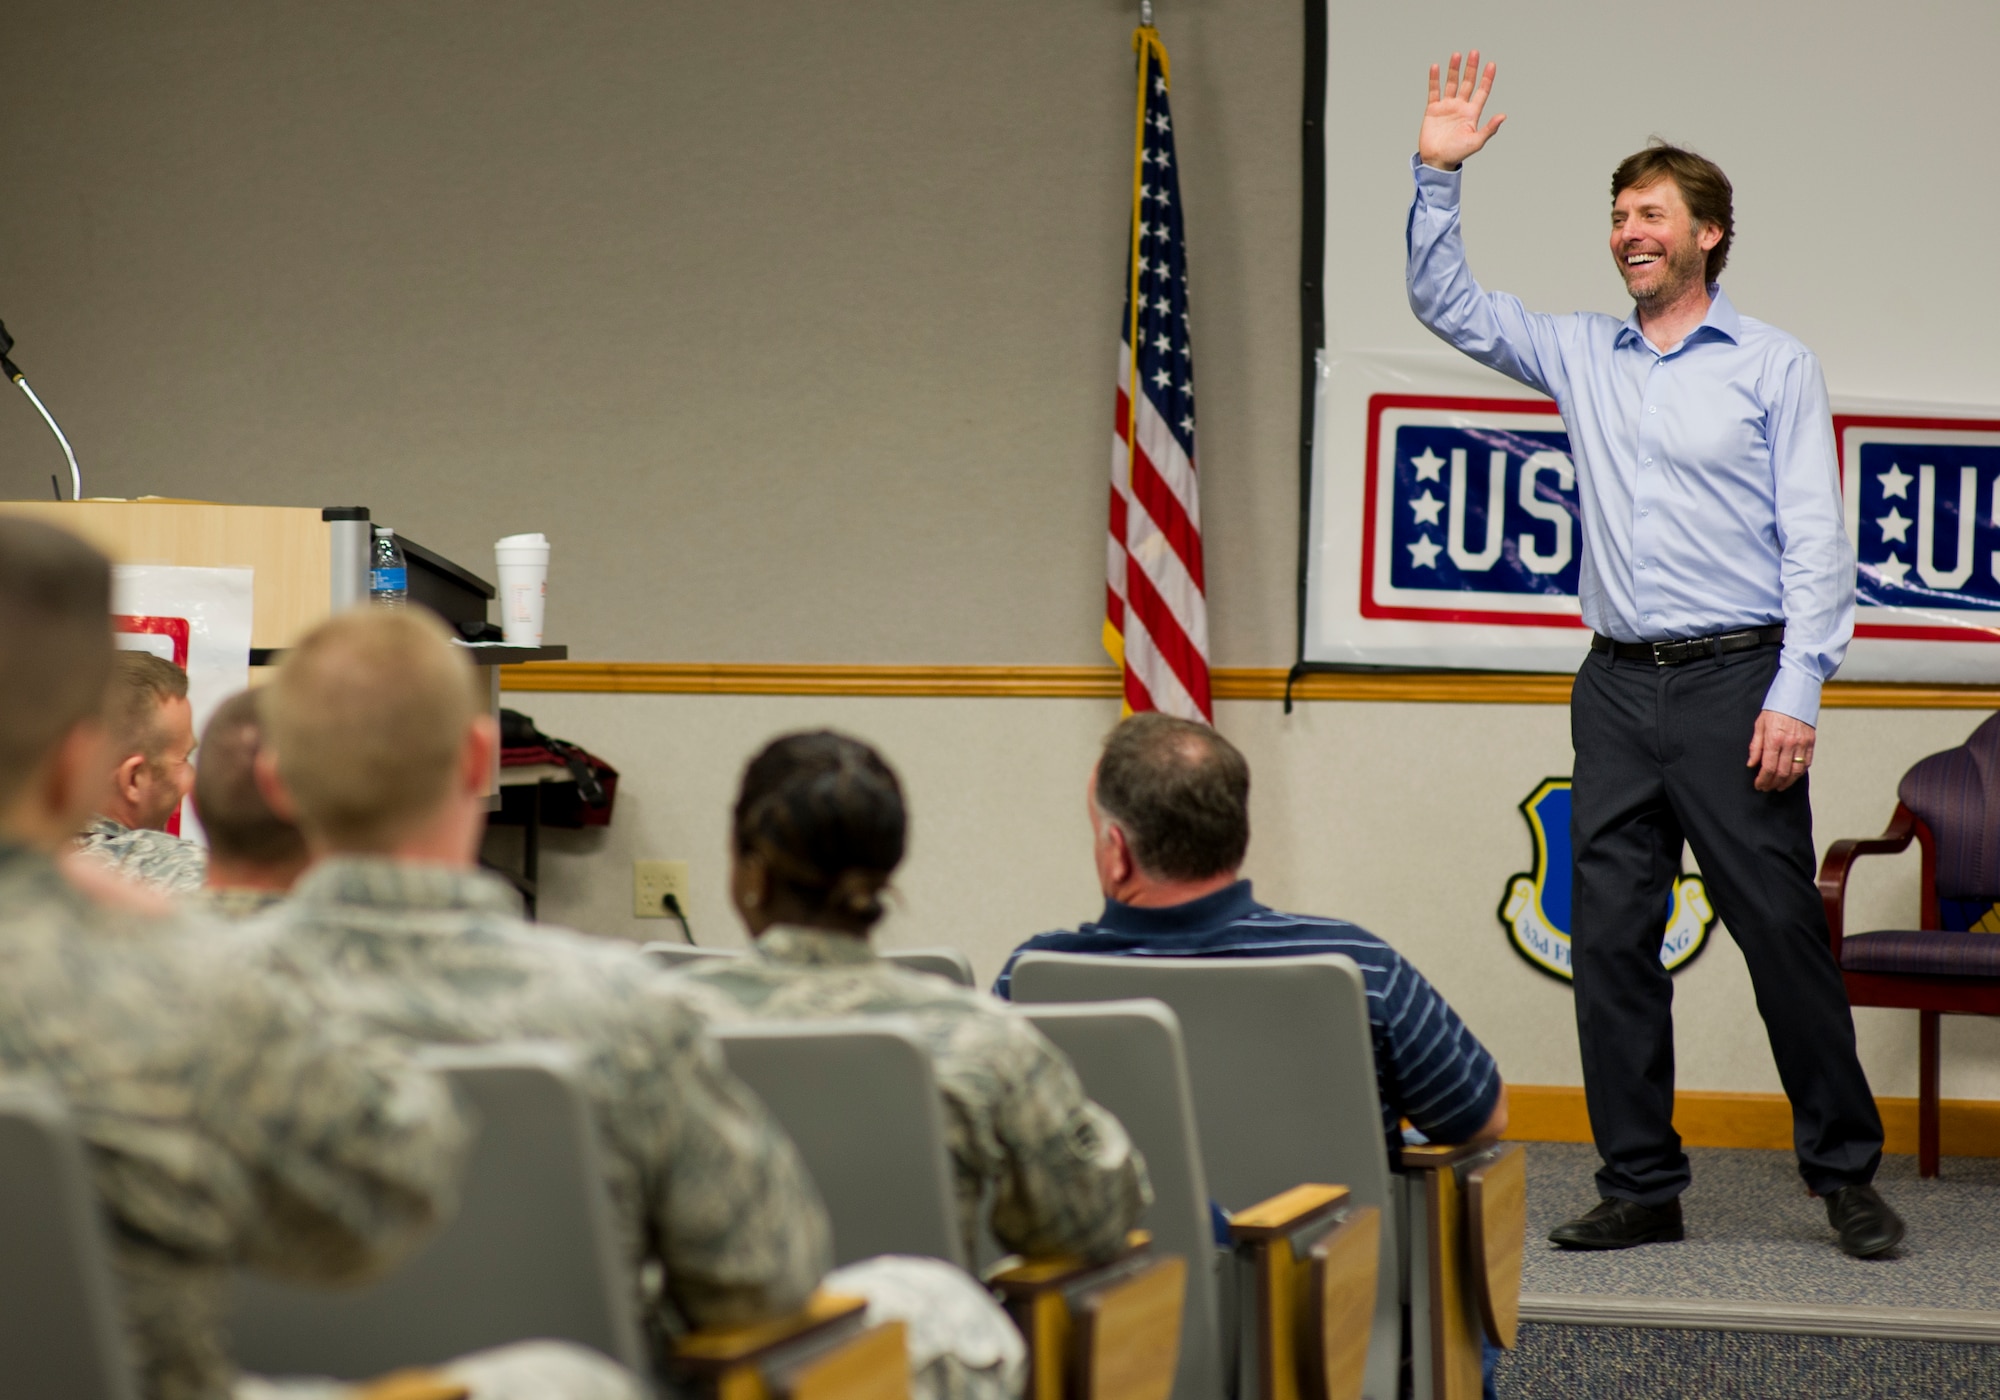 Erik Stolhanske, actor/writer from the movies “Super Troopers”, “The Slammin’ Salmon” and “Beerfest” and member of the comedy group Broken Lizard, speaks to Tyndall Airmen during a Game On Nation seminar Jan. 23 in the 337th Air Control Squadron auditorium. Game On Nation is a company dedicated to training groups in communication, leadership, teambuilding and media training through fun and interactive games that break down barriers and create a positive, comfortable environment.  (U.S. Air Force photo by Senior Airman Alex Echols/Released)